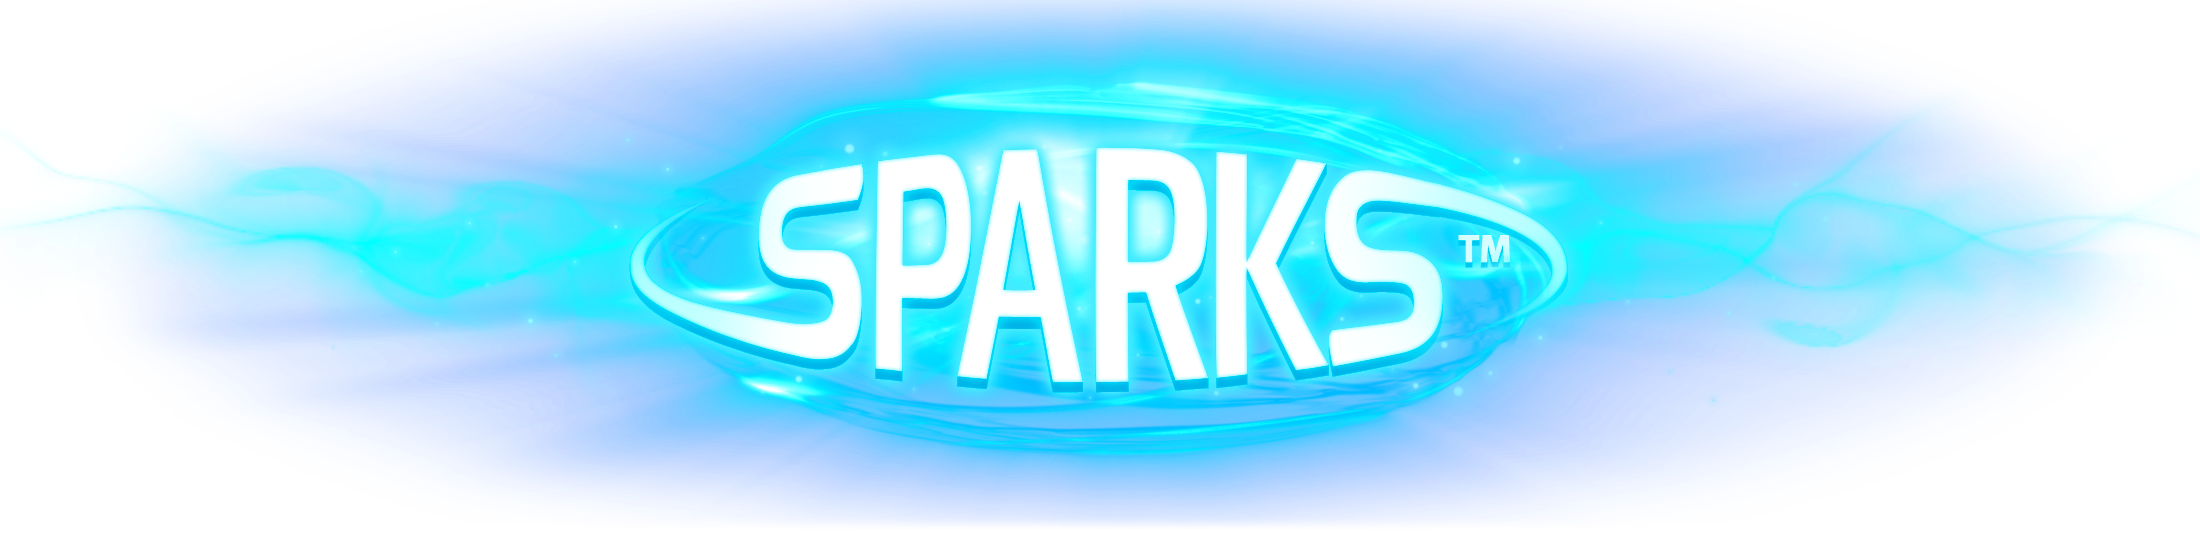 03_logo_one-way_sparks.png thumbnail